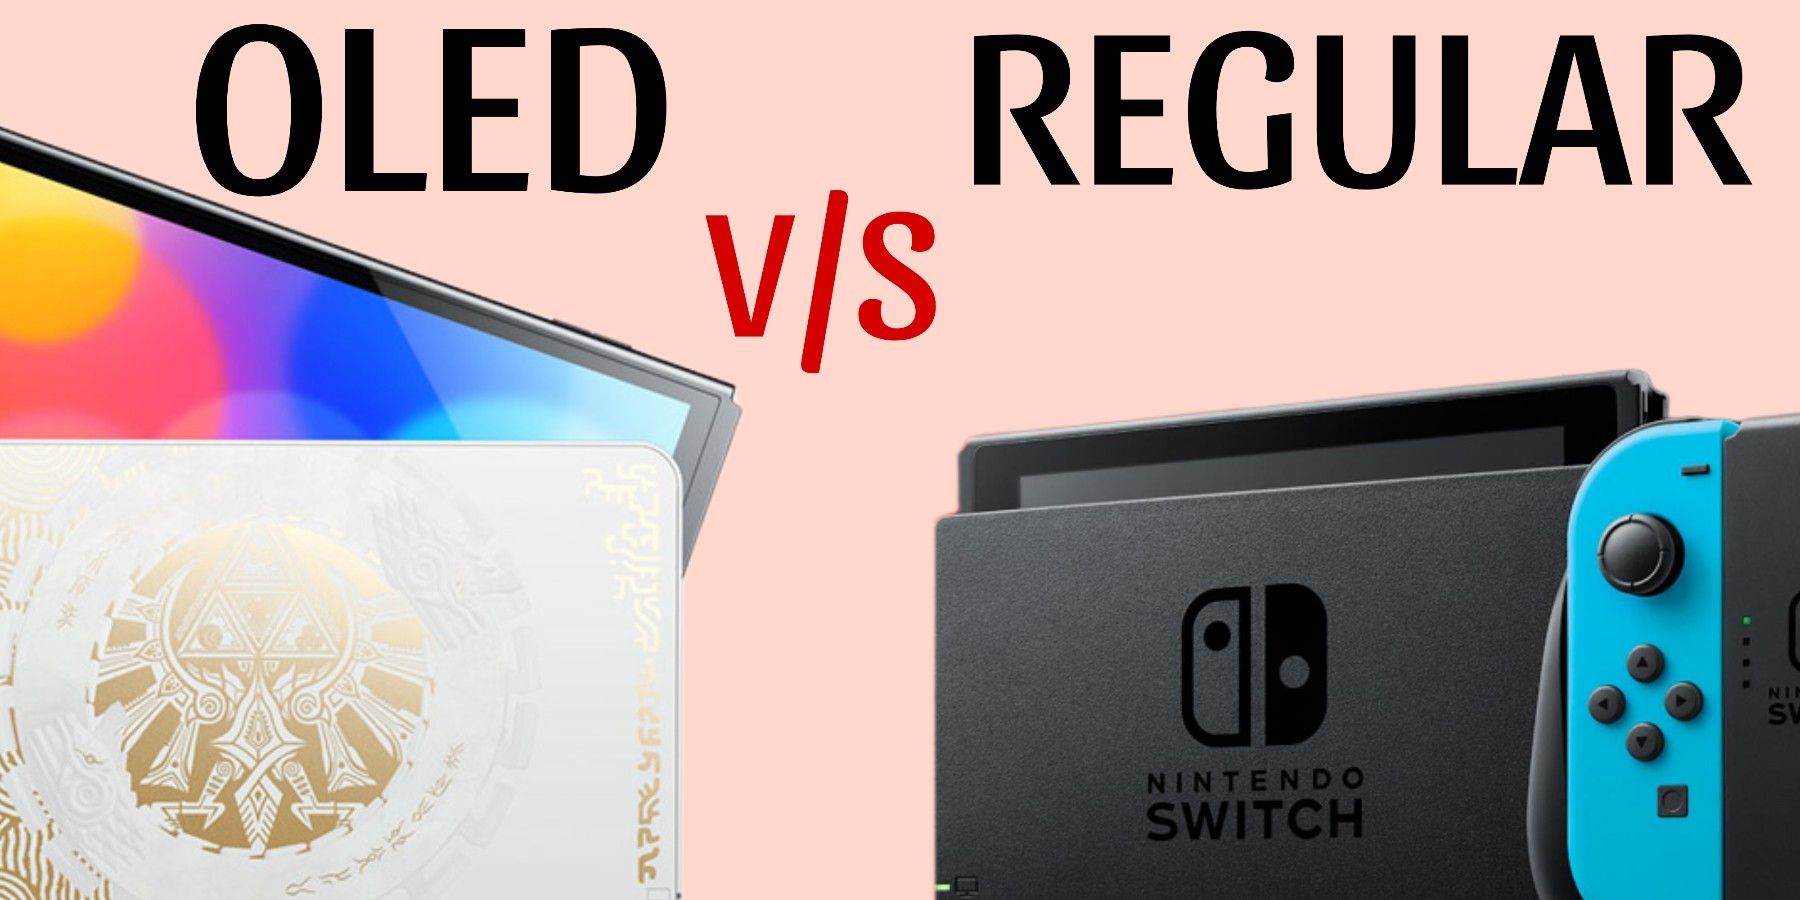 Nintendo Switch OLED vs Regular: What's the Difference?